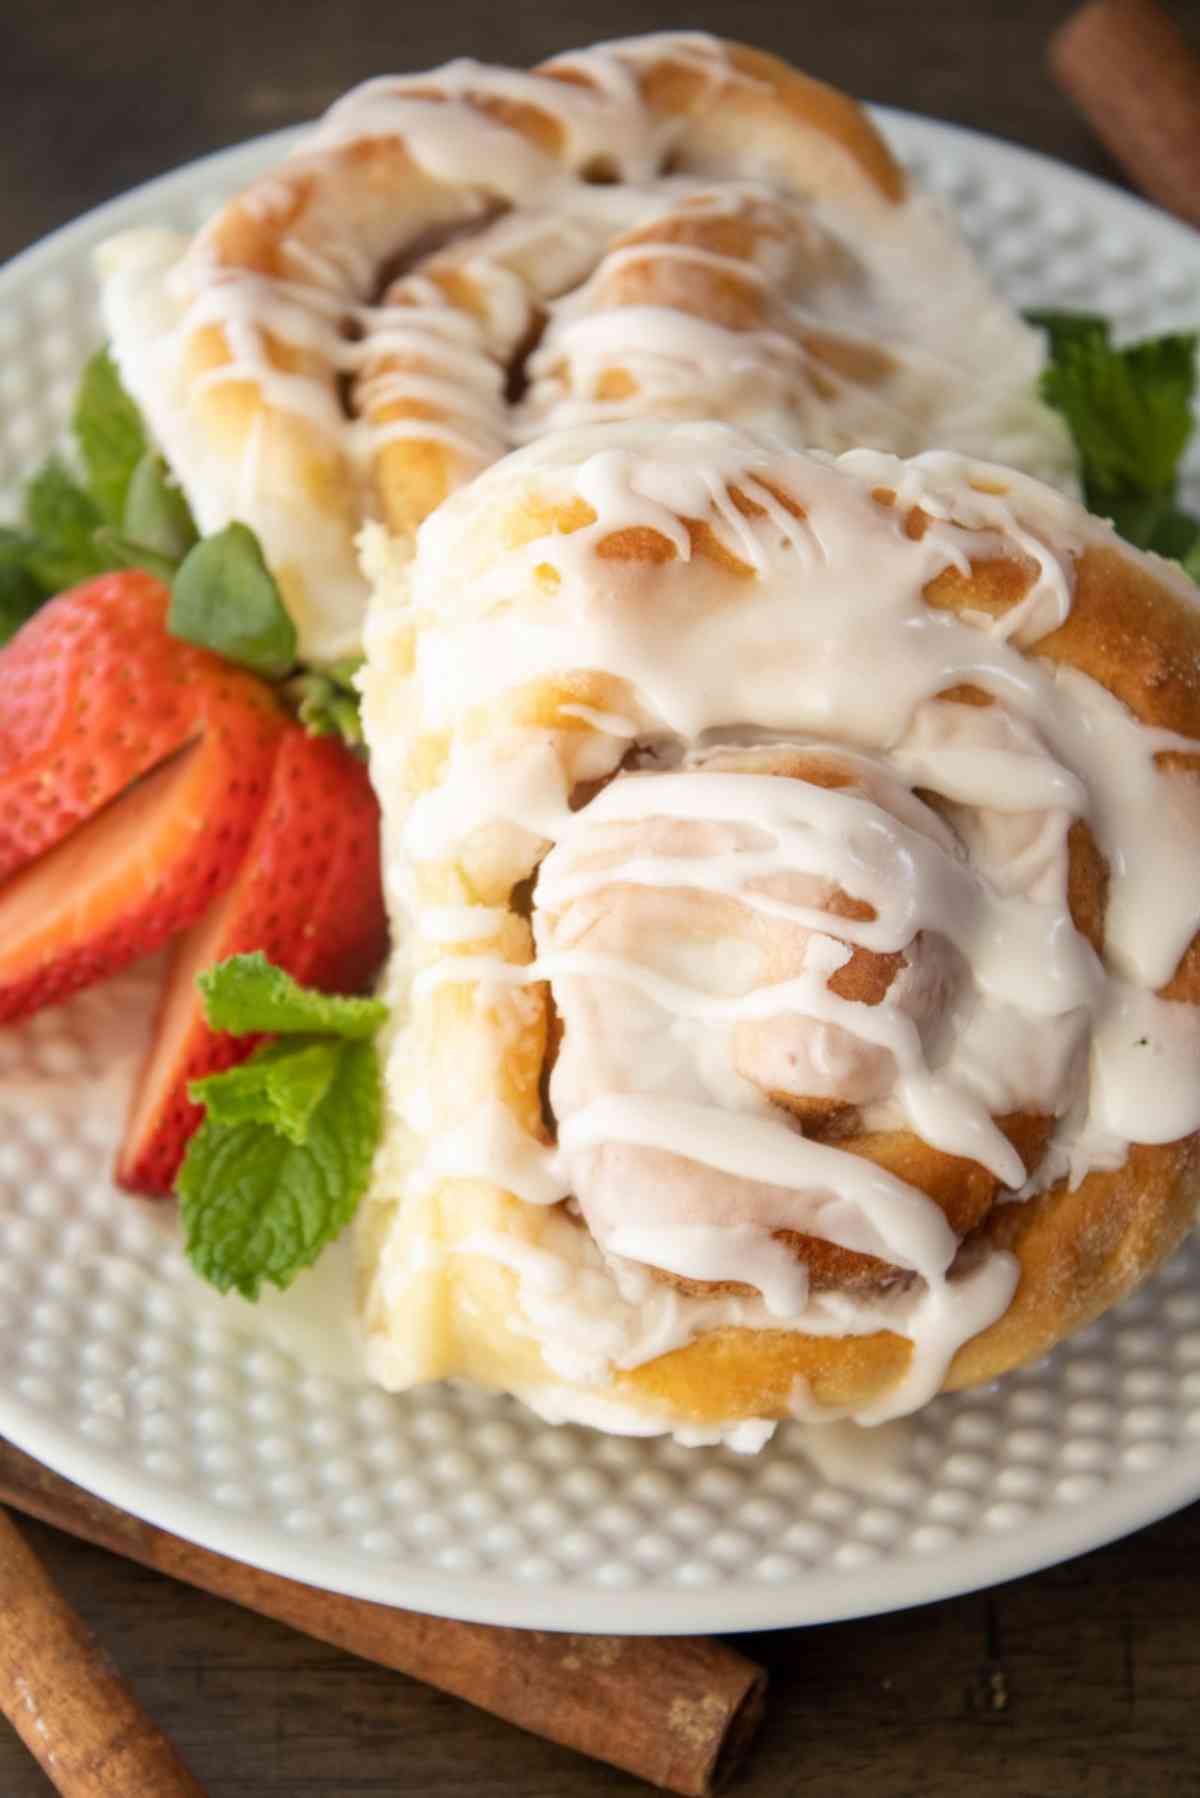 Delicious cinnamon rolls on a plate!